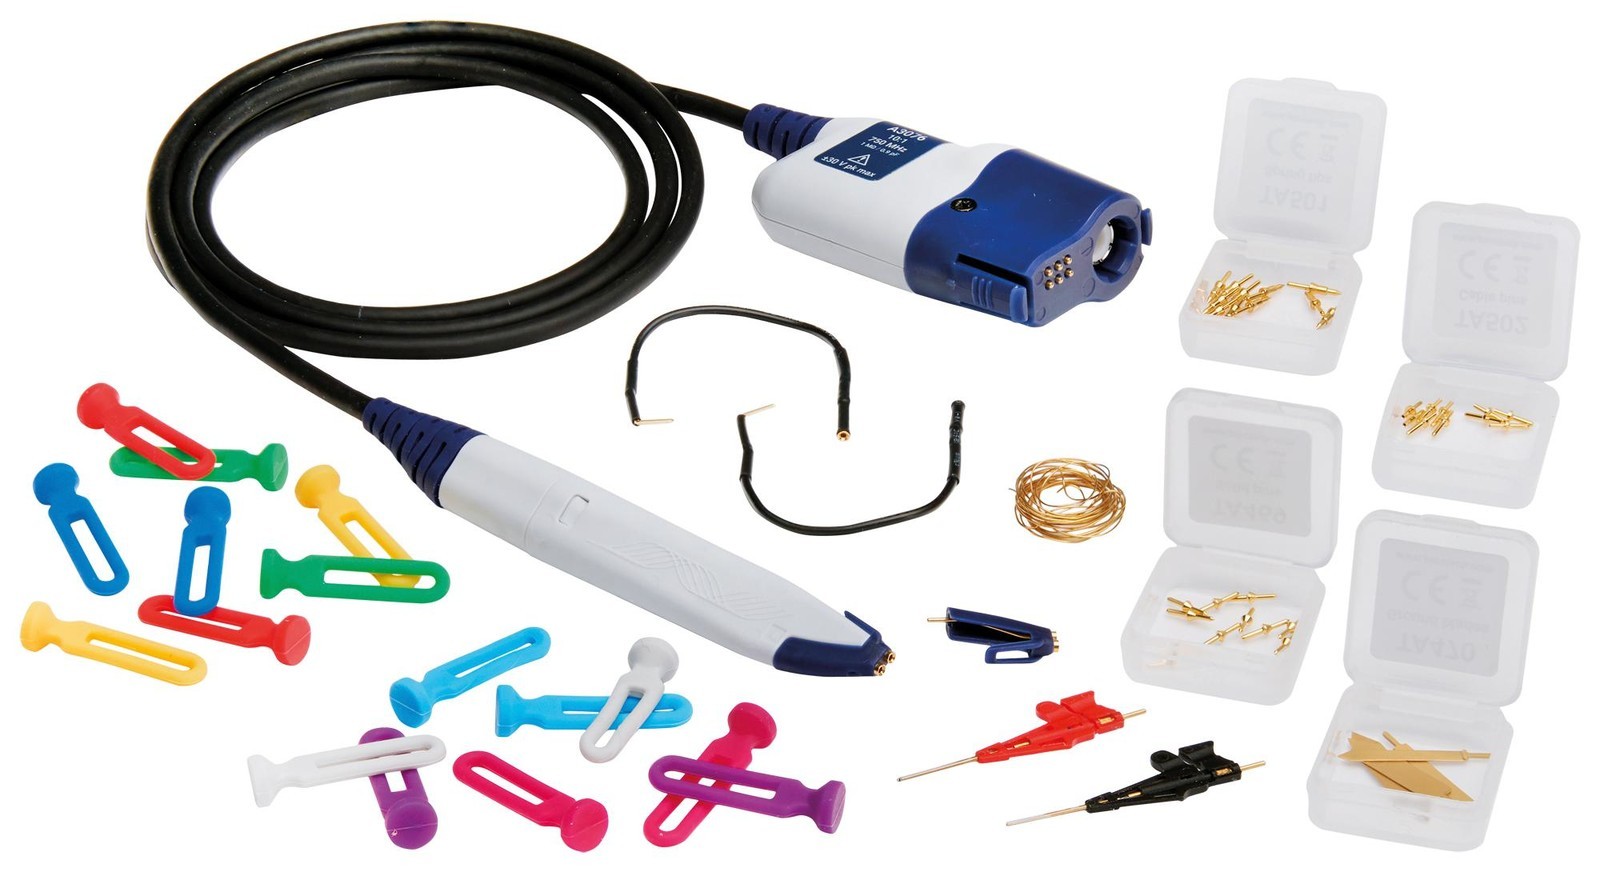 Pico Technology A3136 Single Ended Active Probe Kit, 1.3 Ghz